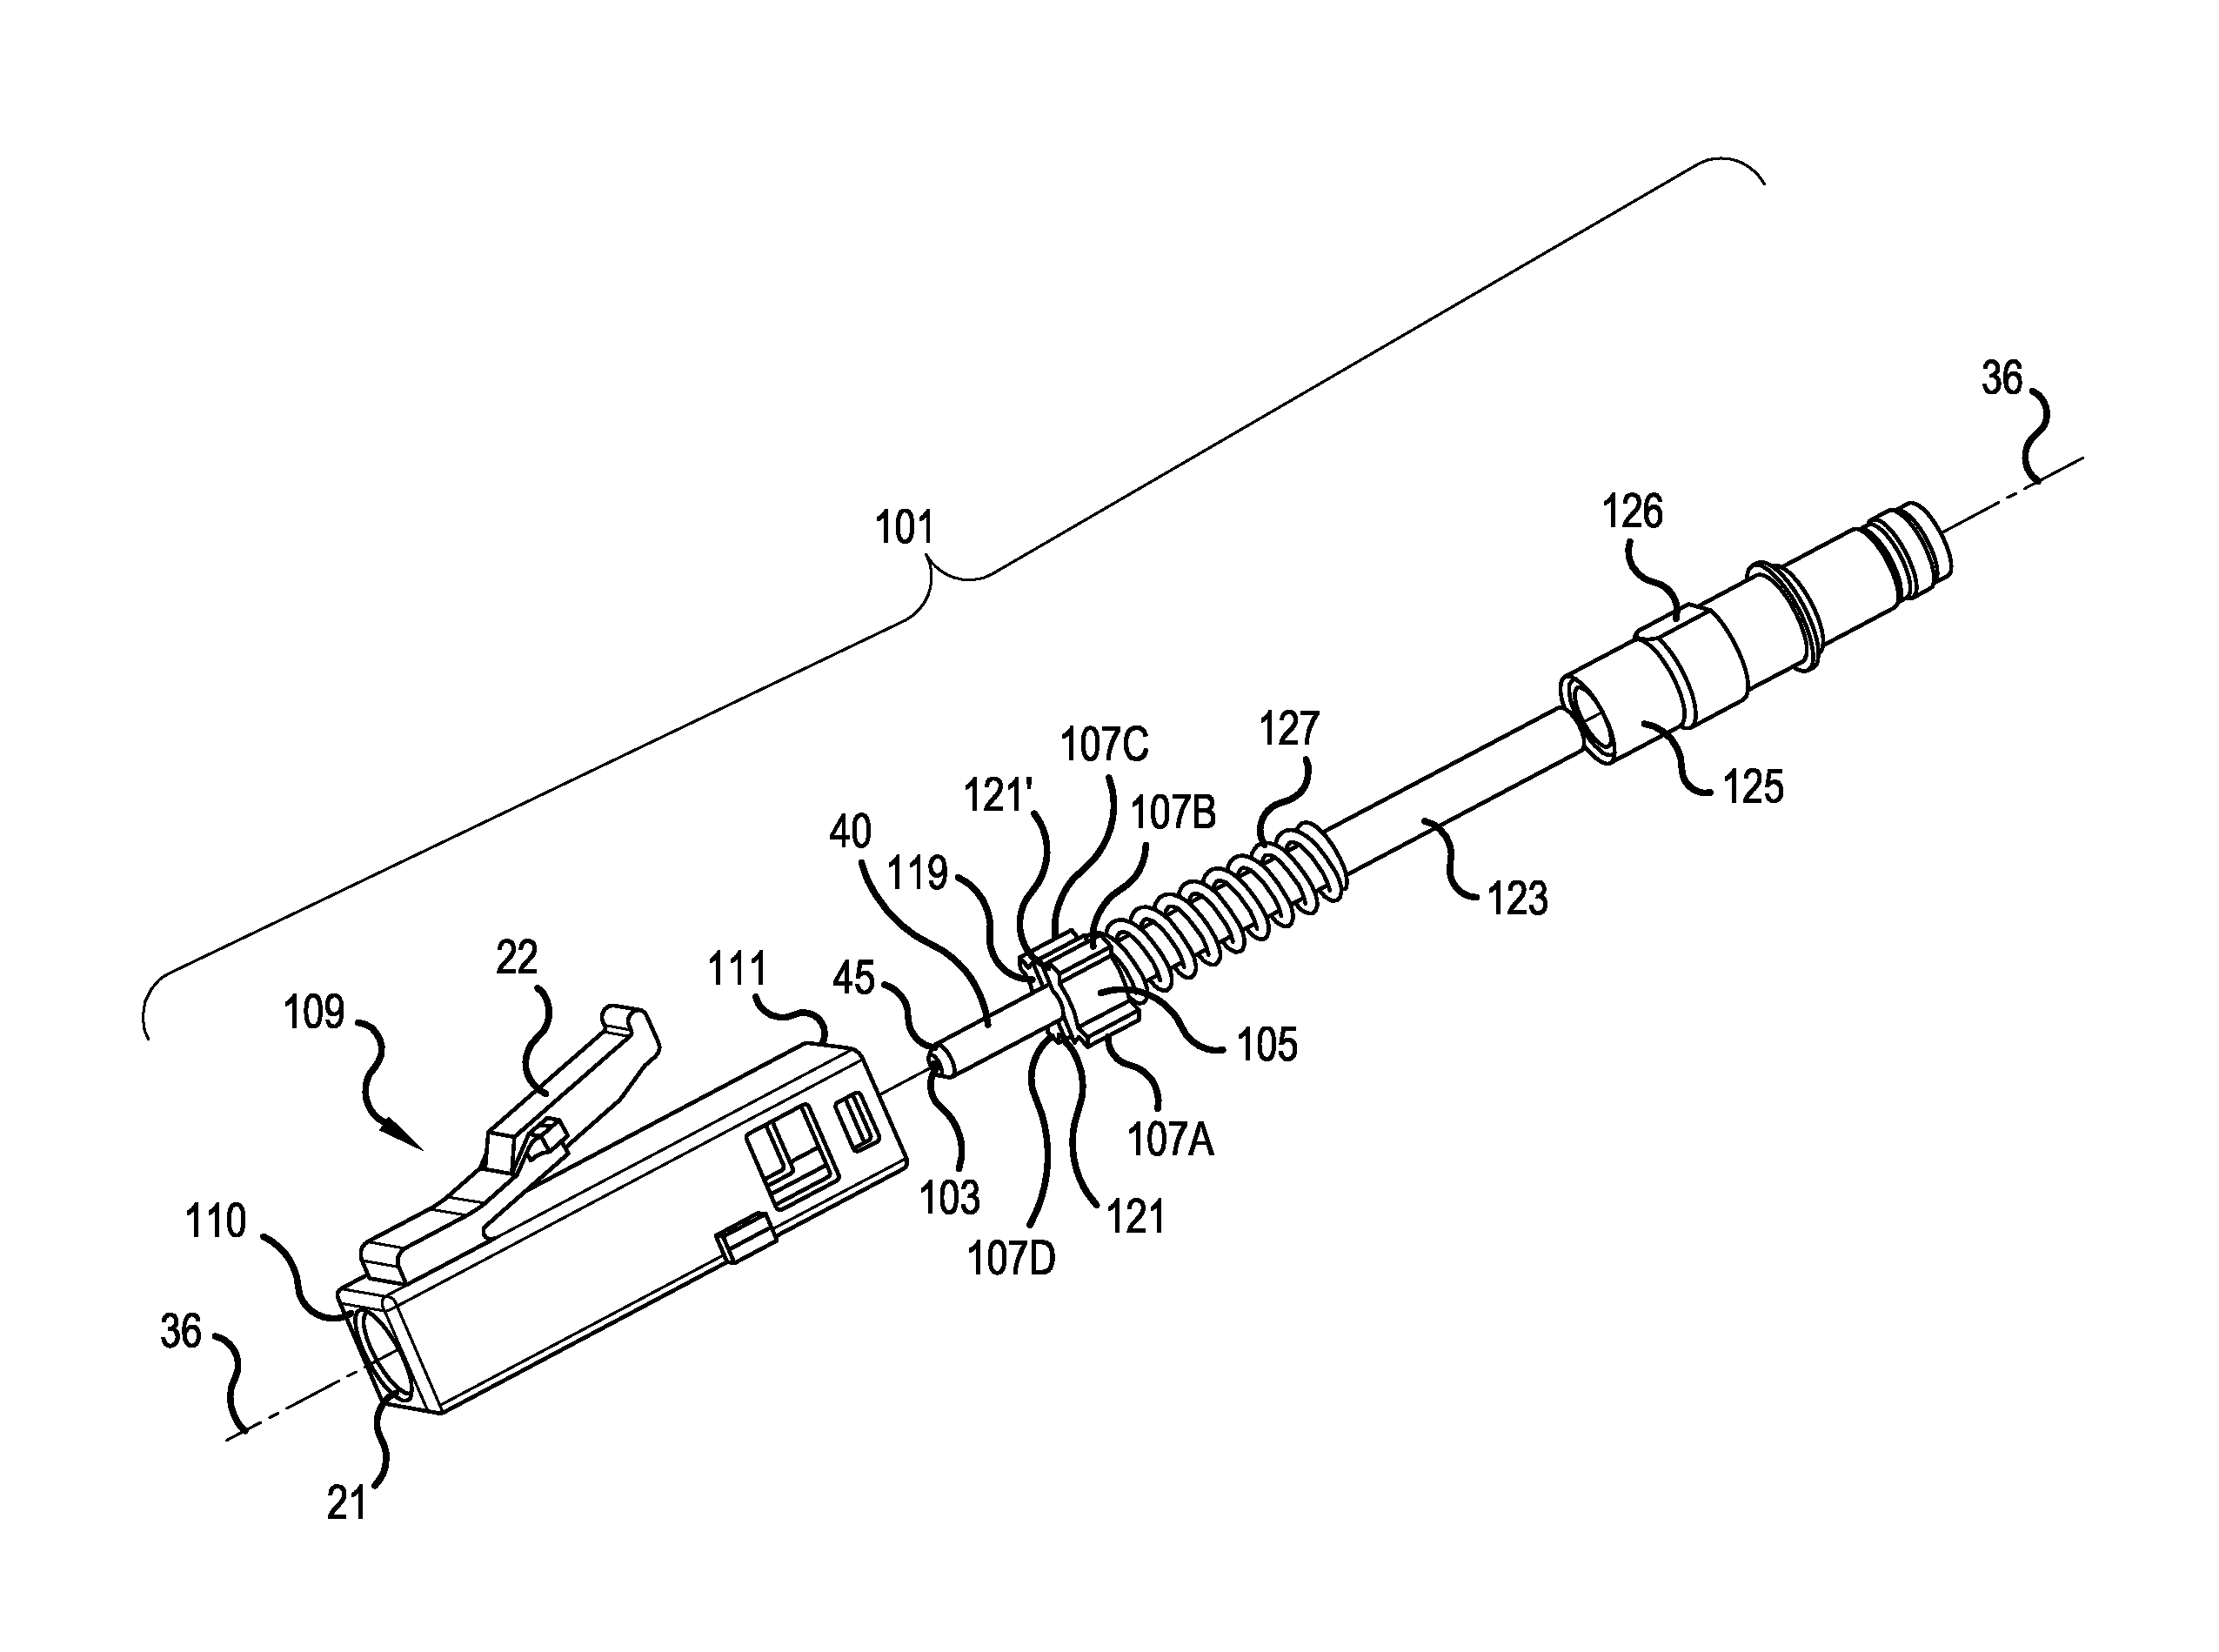 Connector for multiple core optical fiber